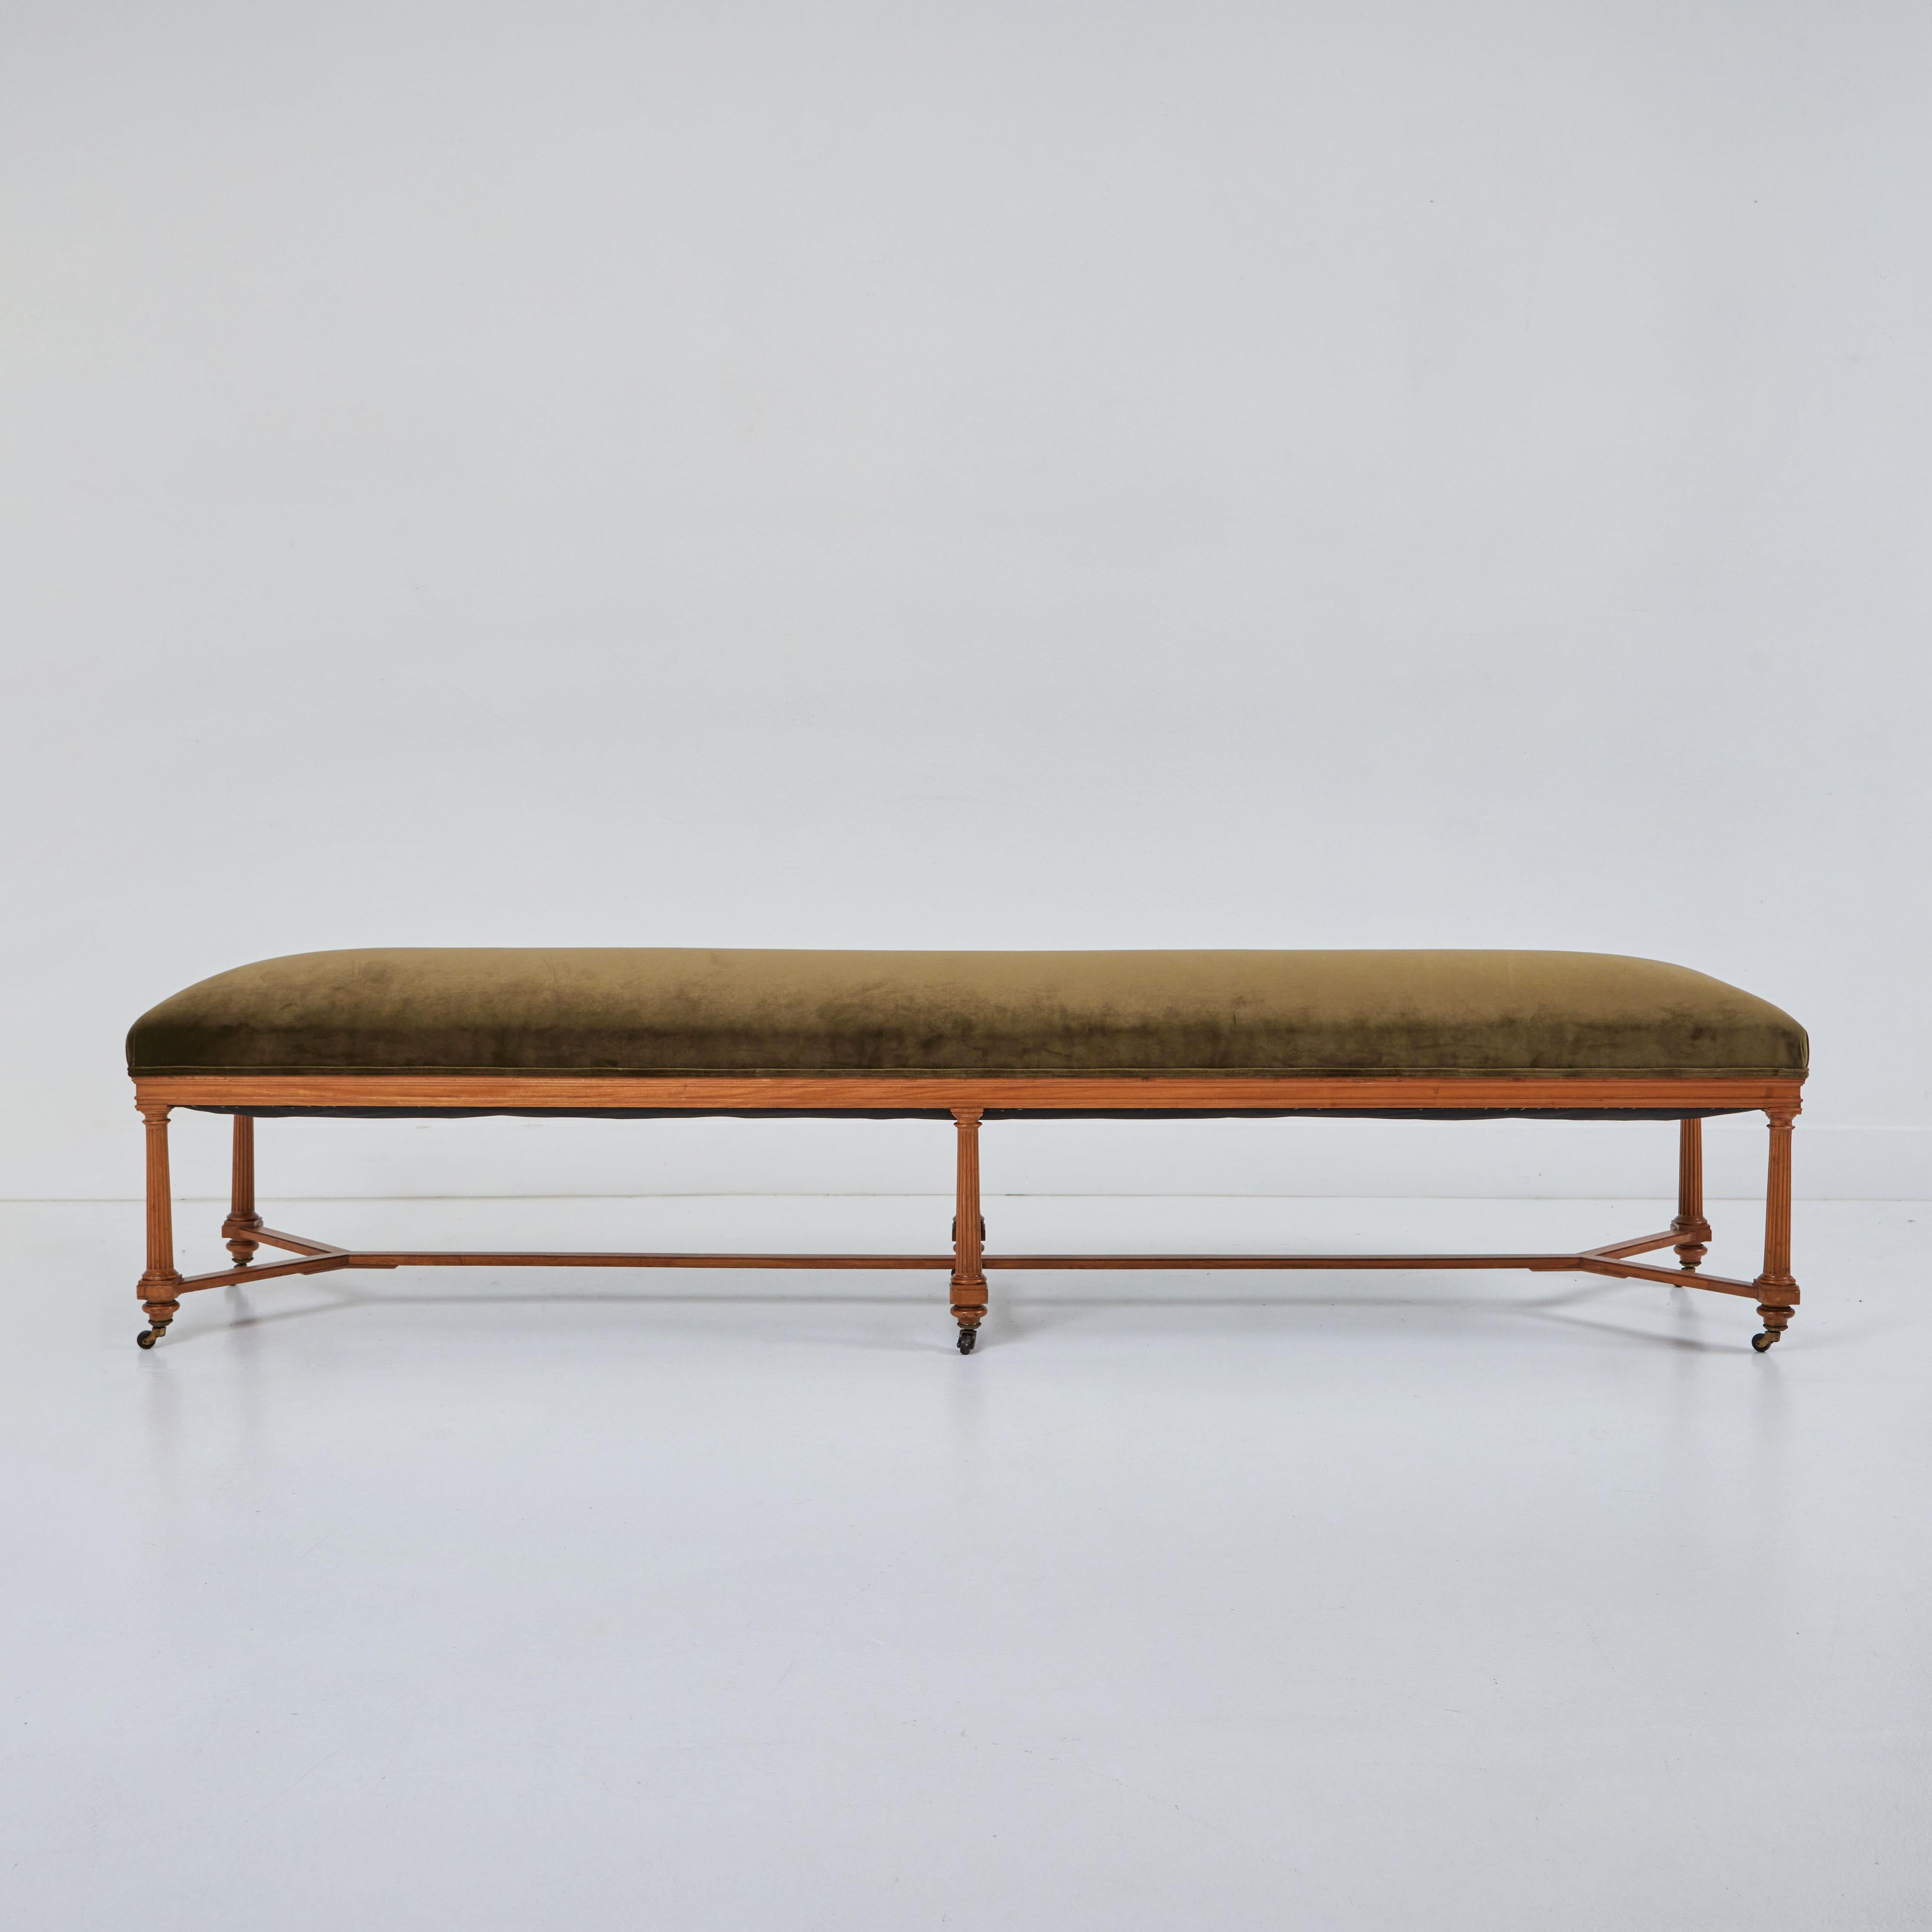 American A Pair of Neoclassical Long Benches